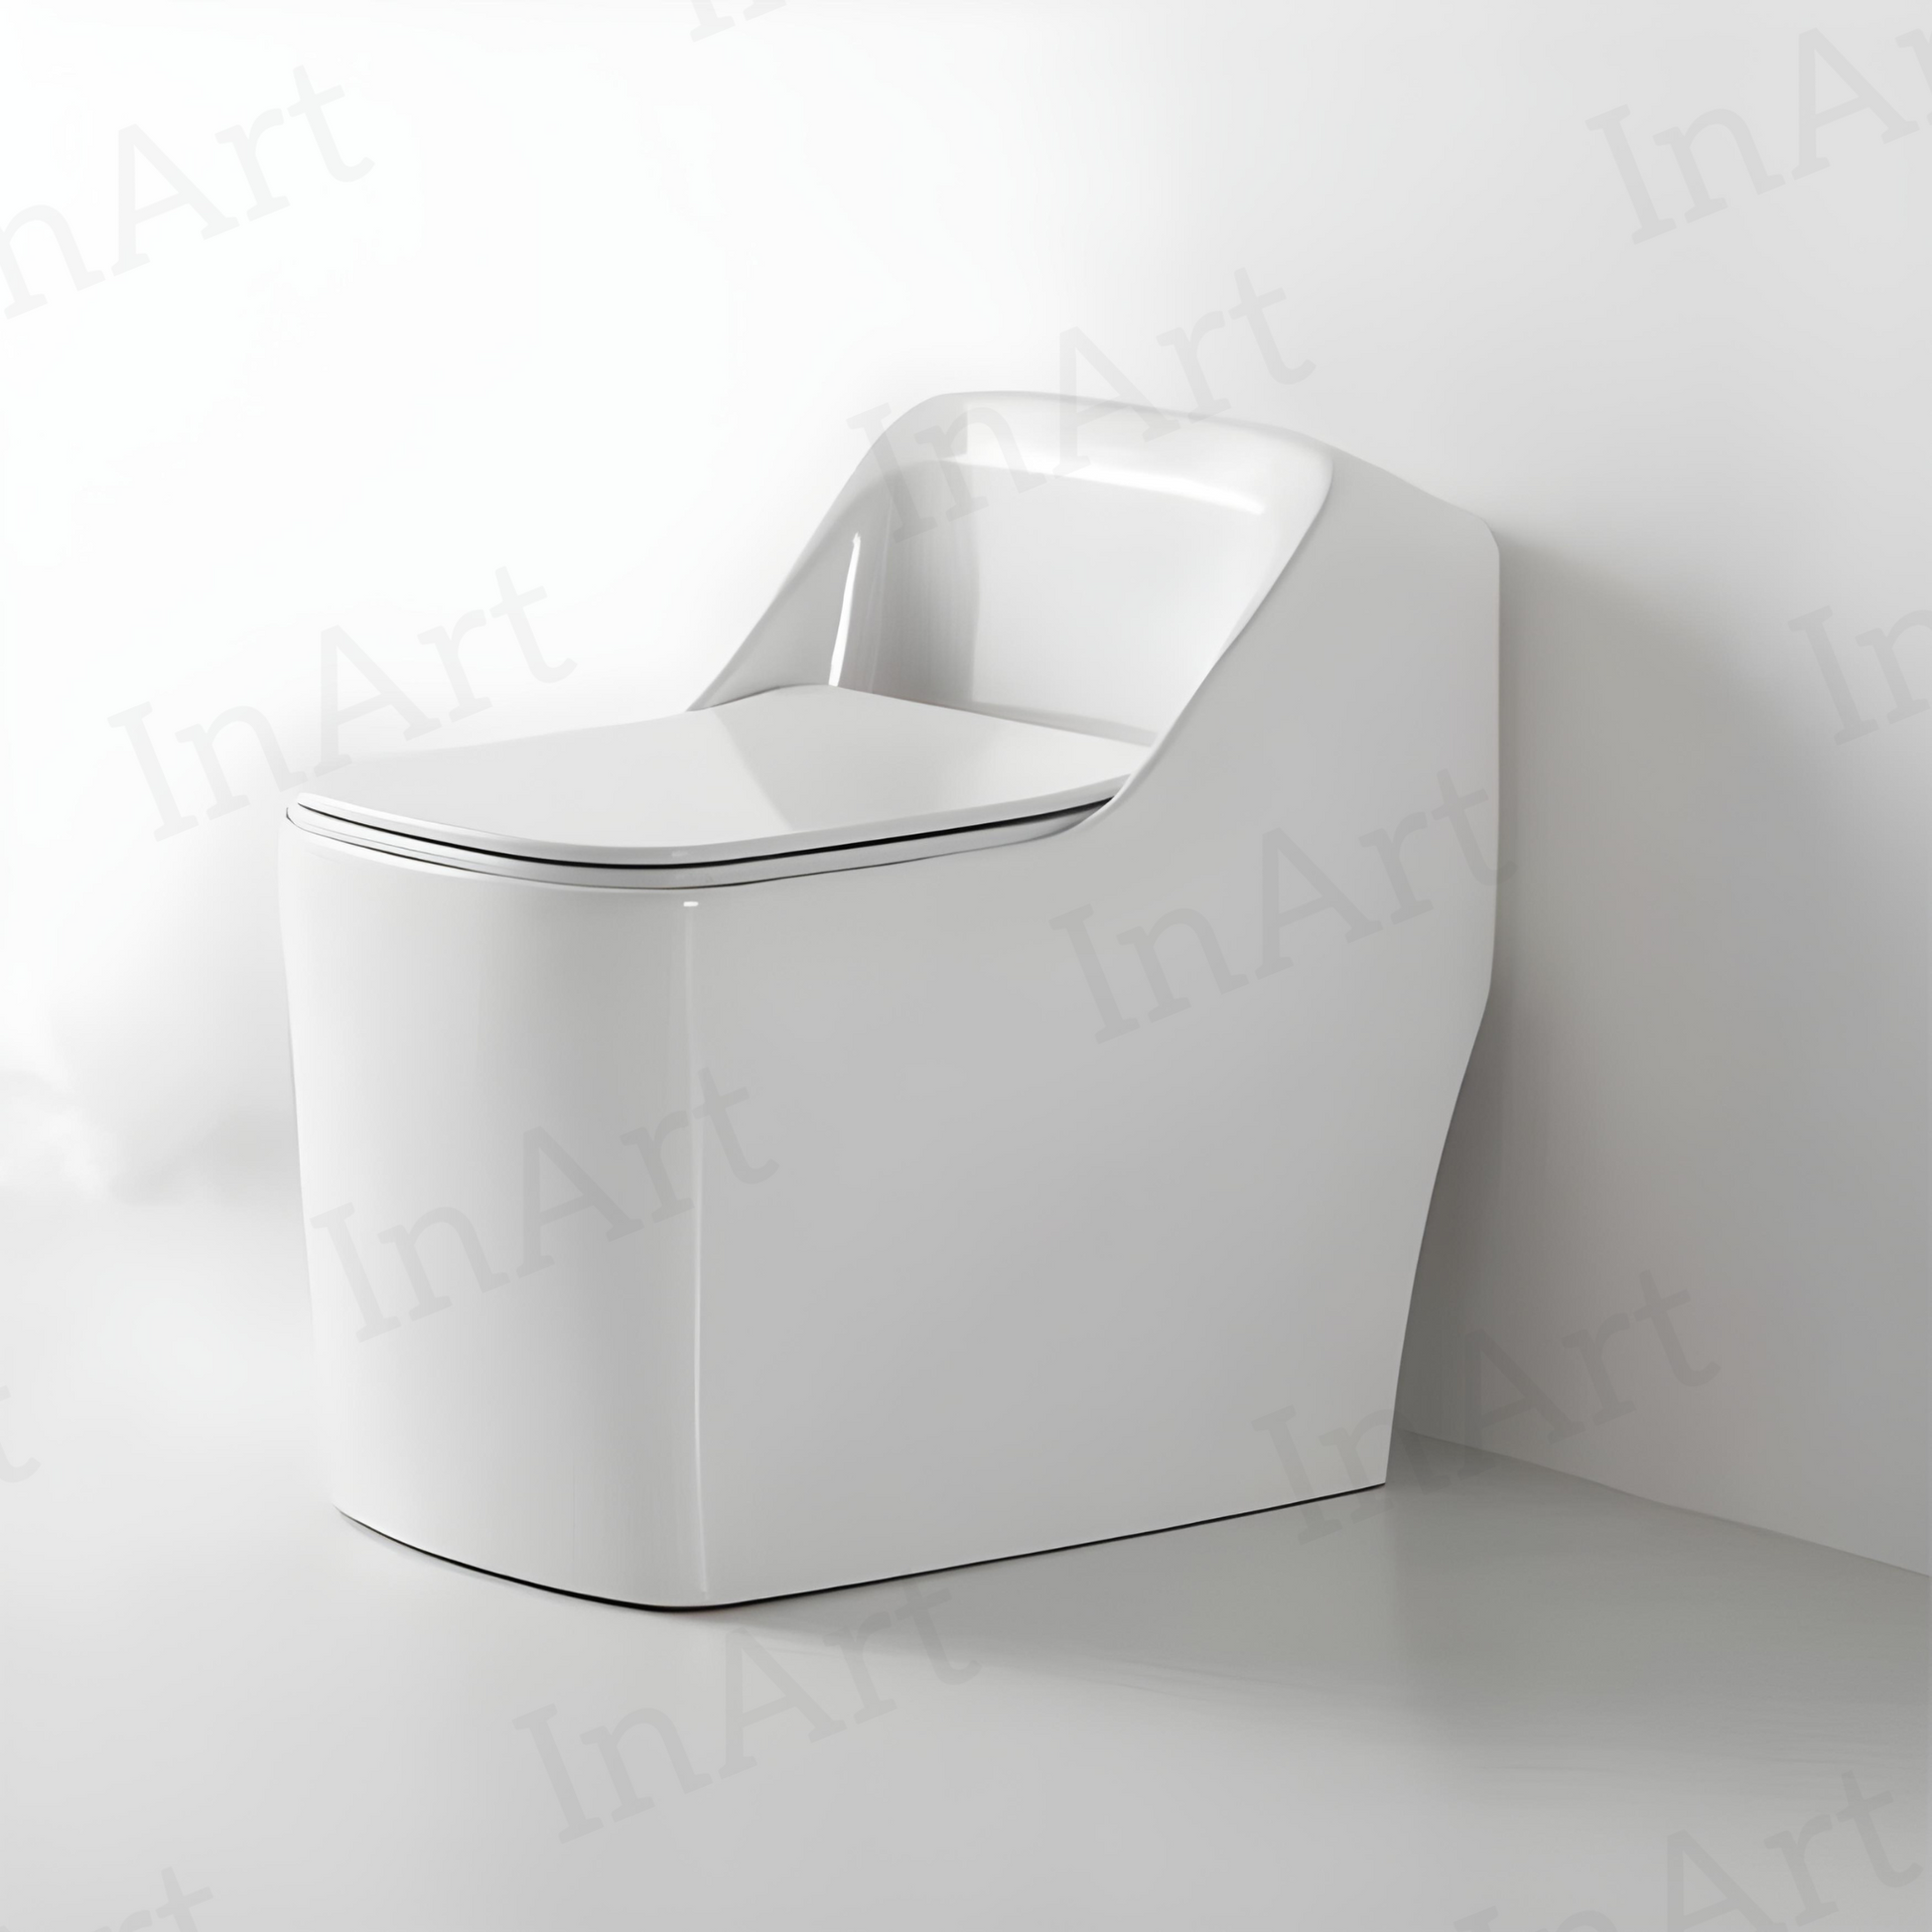 InArt Platinum Ceramic Rimless One-Piece Western Toilet with Soft Close Seat, S Trap Outlet, Glossy White - 67x41x60 cm - InArt-Studio